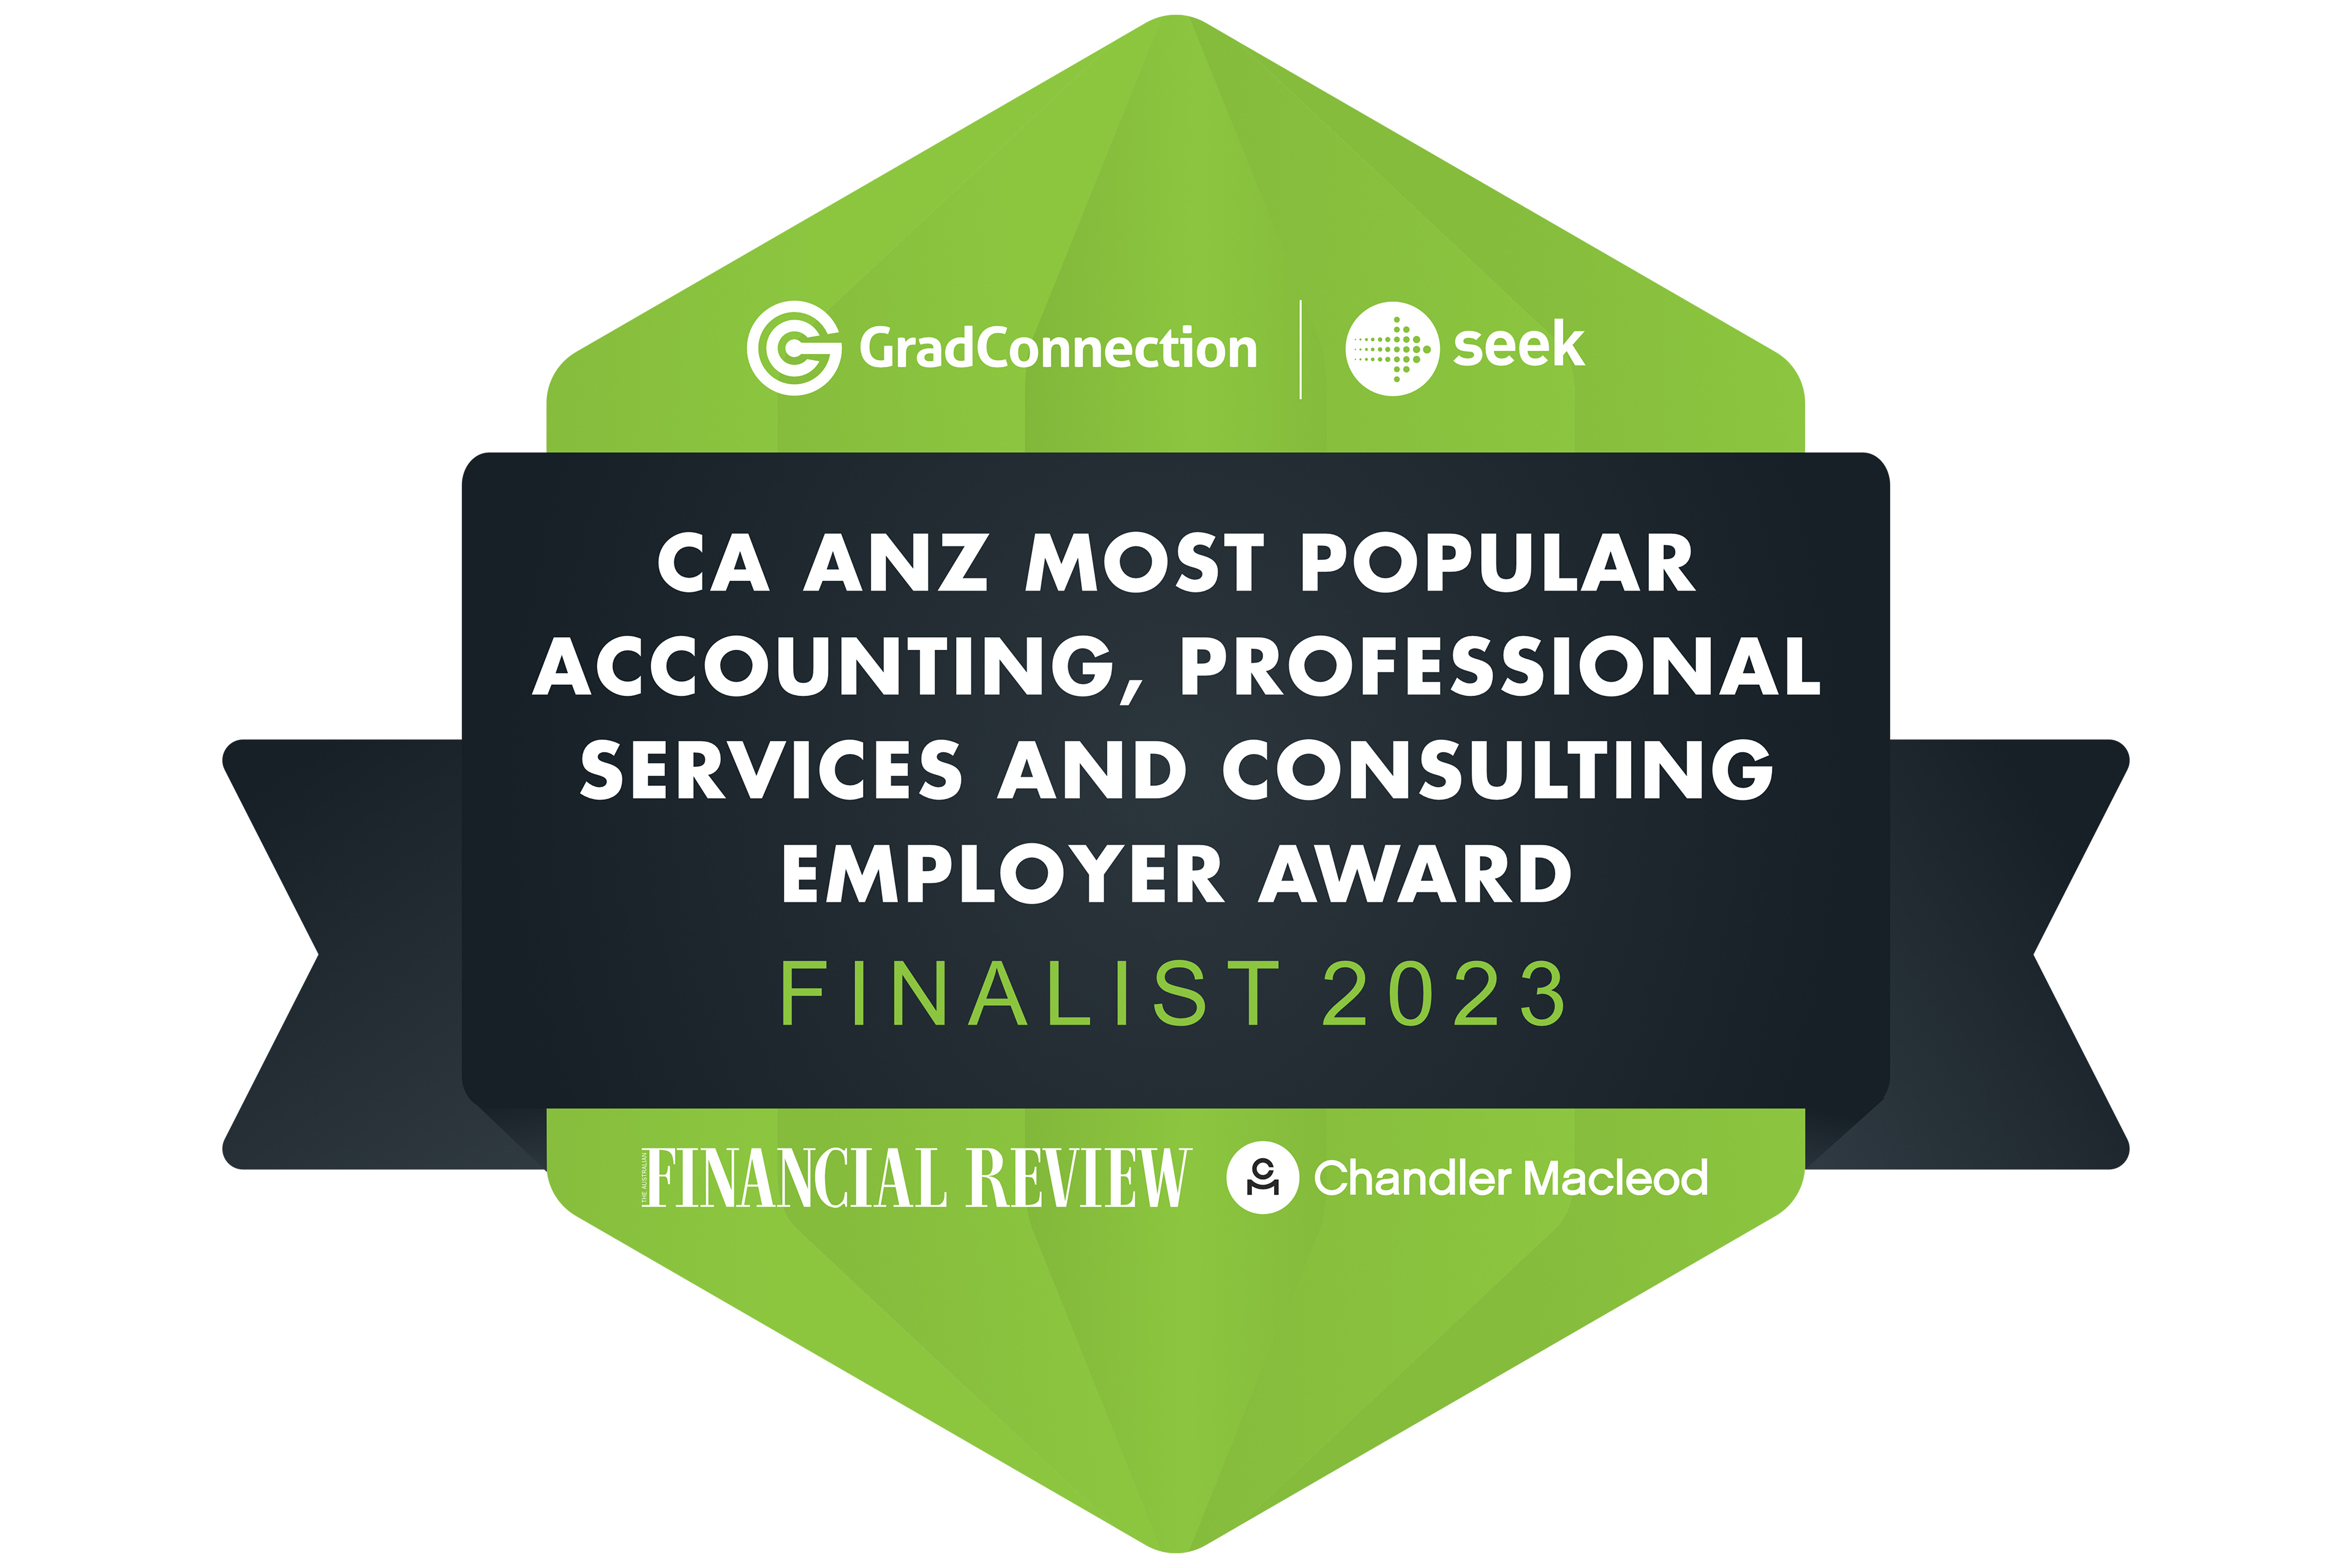 CA ANZ most popular accounting, professional services and consulting employer award